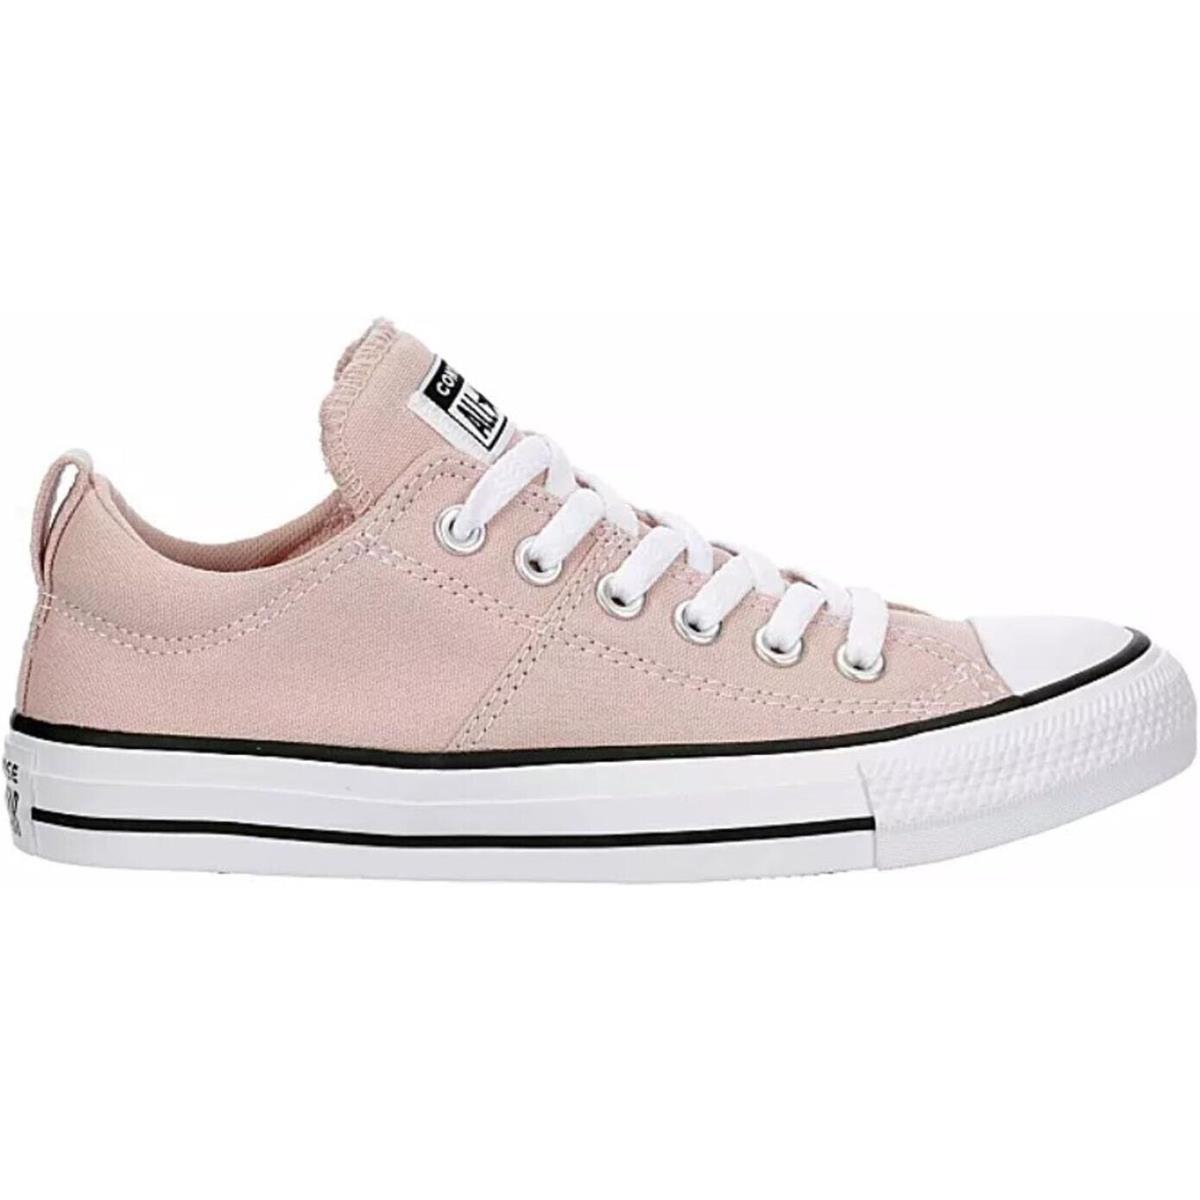 Converse Chuck Taylor All Star Low Pink Sage Women`s Sneakers A06135F Size 7 - Pink